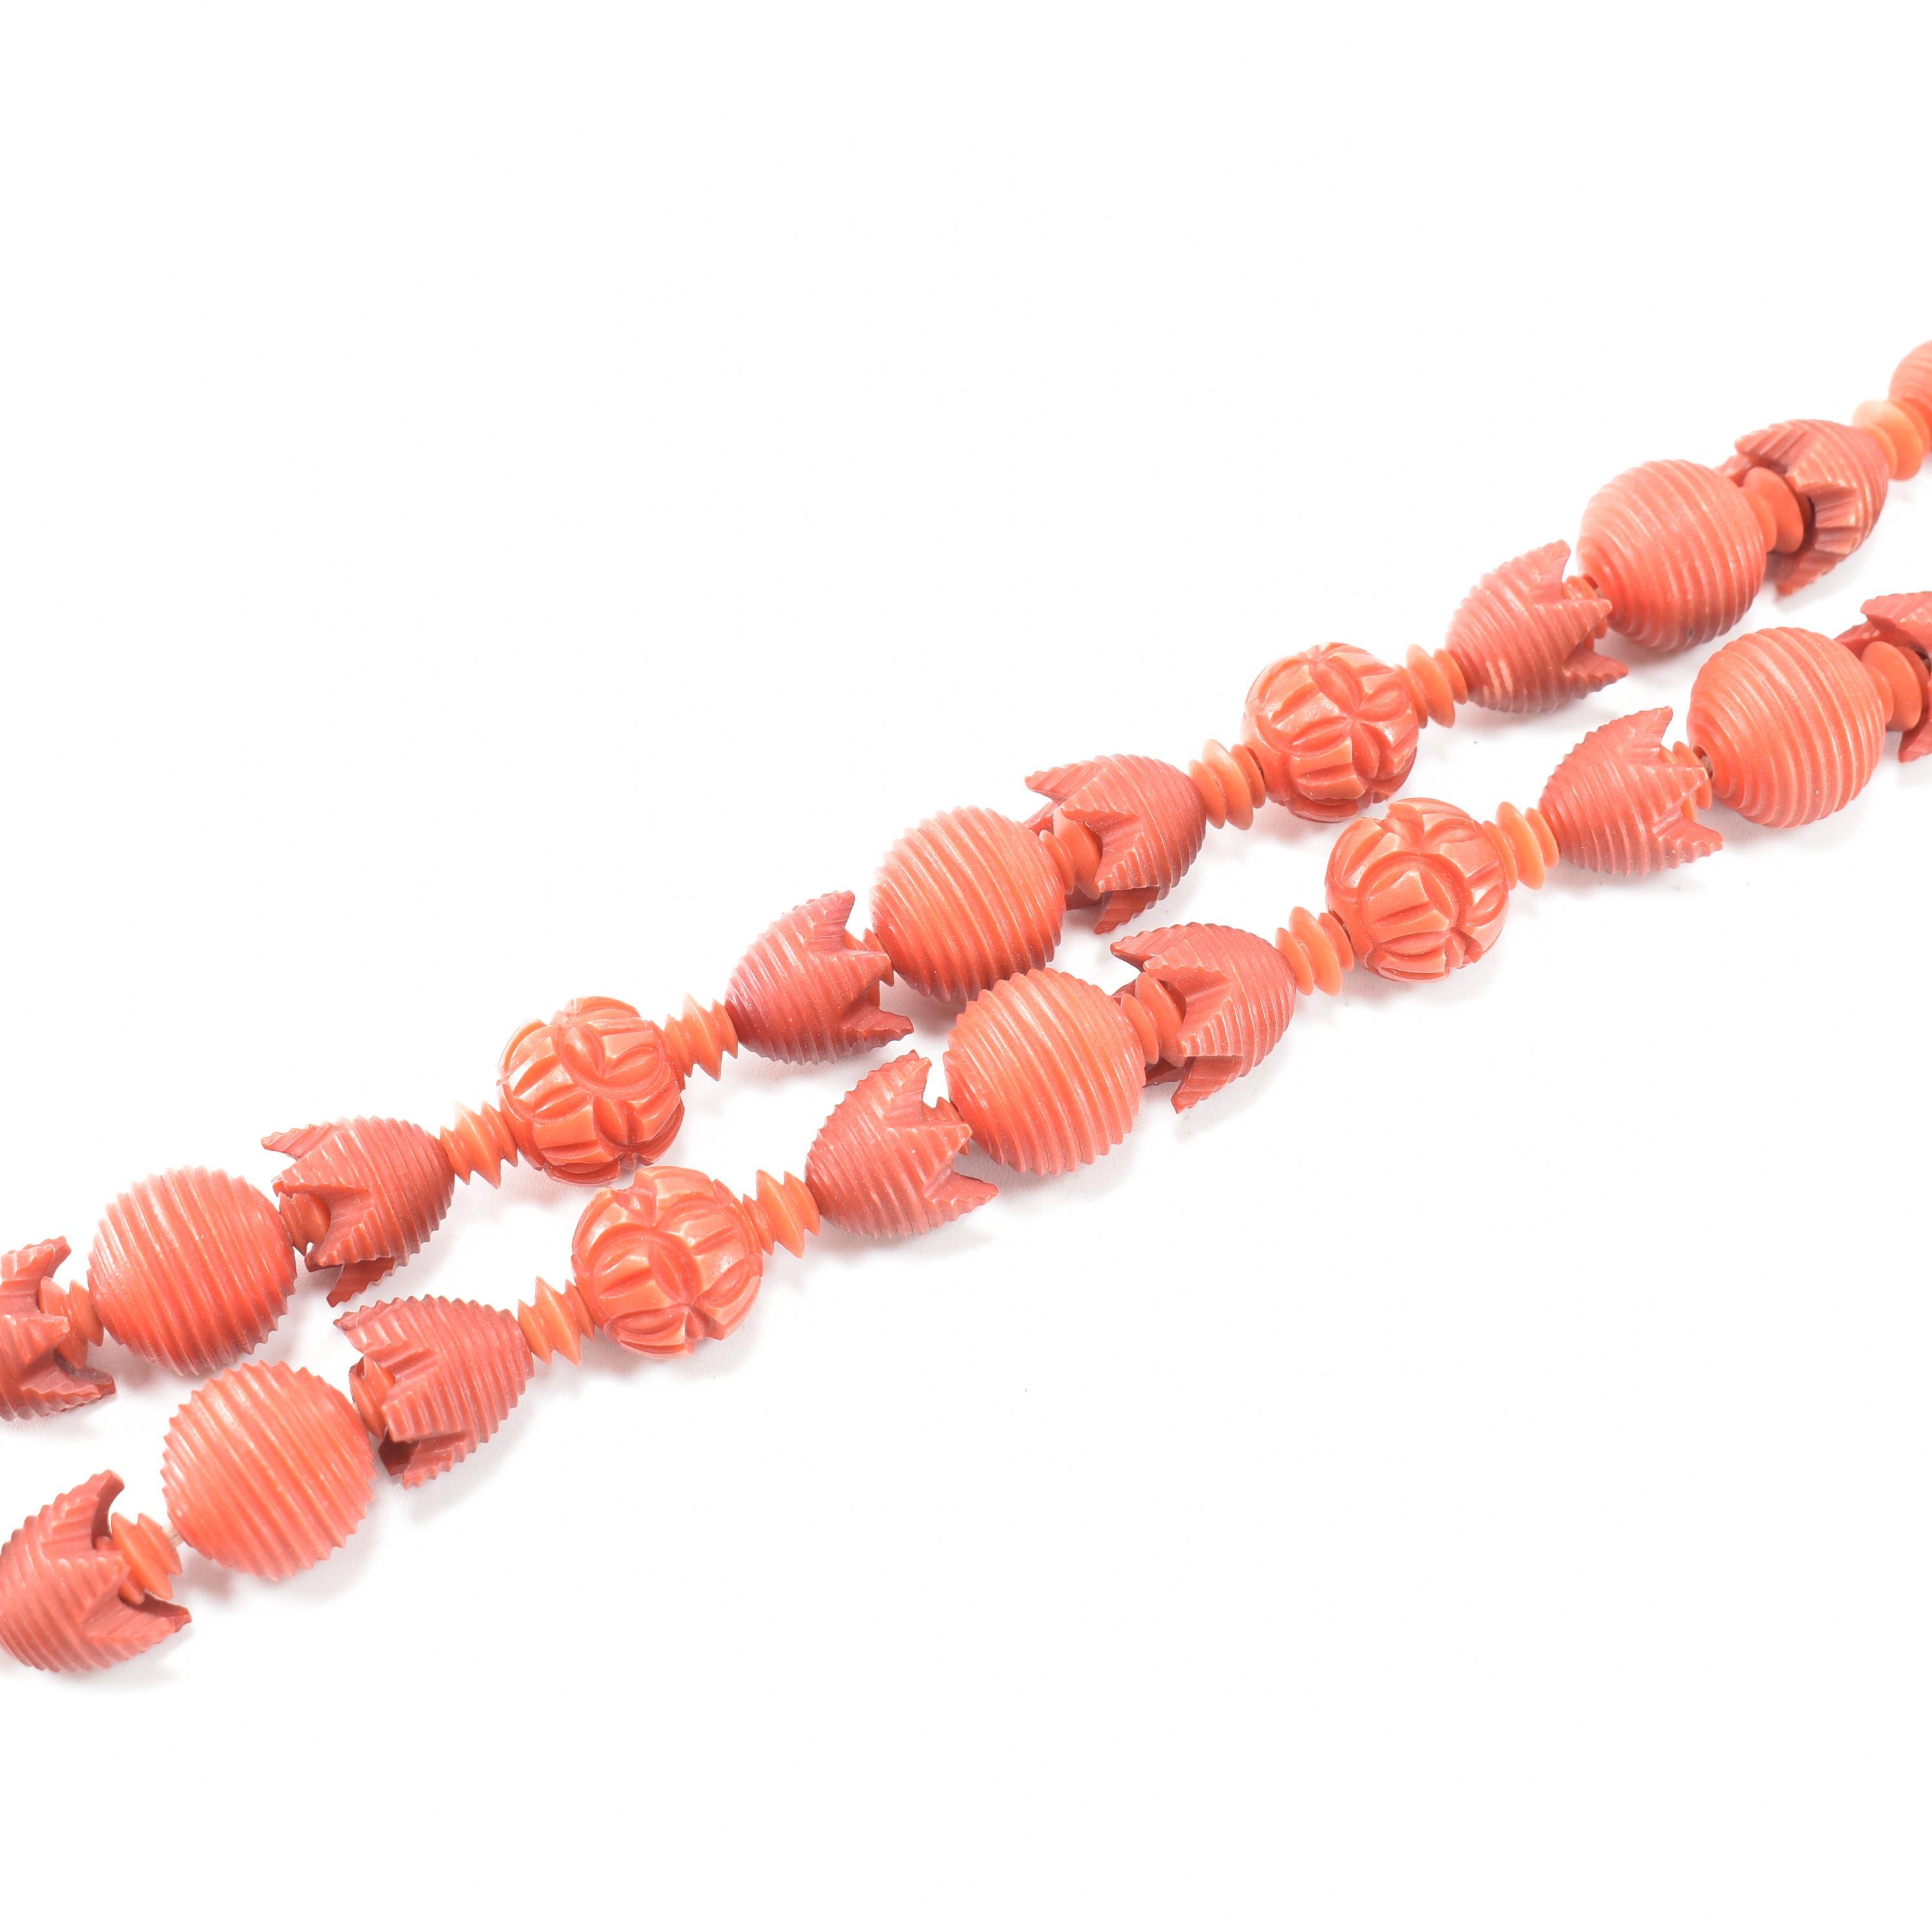 1930S ART DECO EARLY PLASTIC BEADED NECKLACE - Image 2 of 4